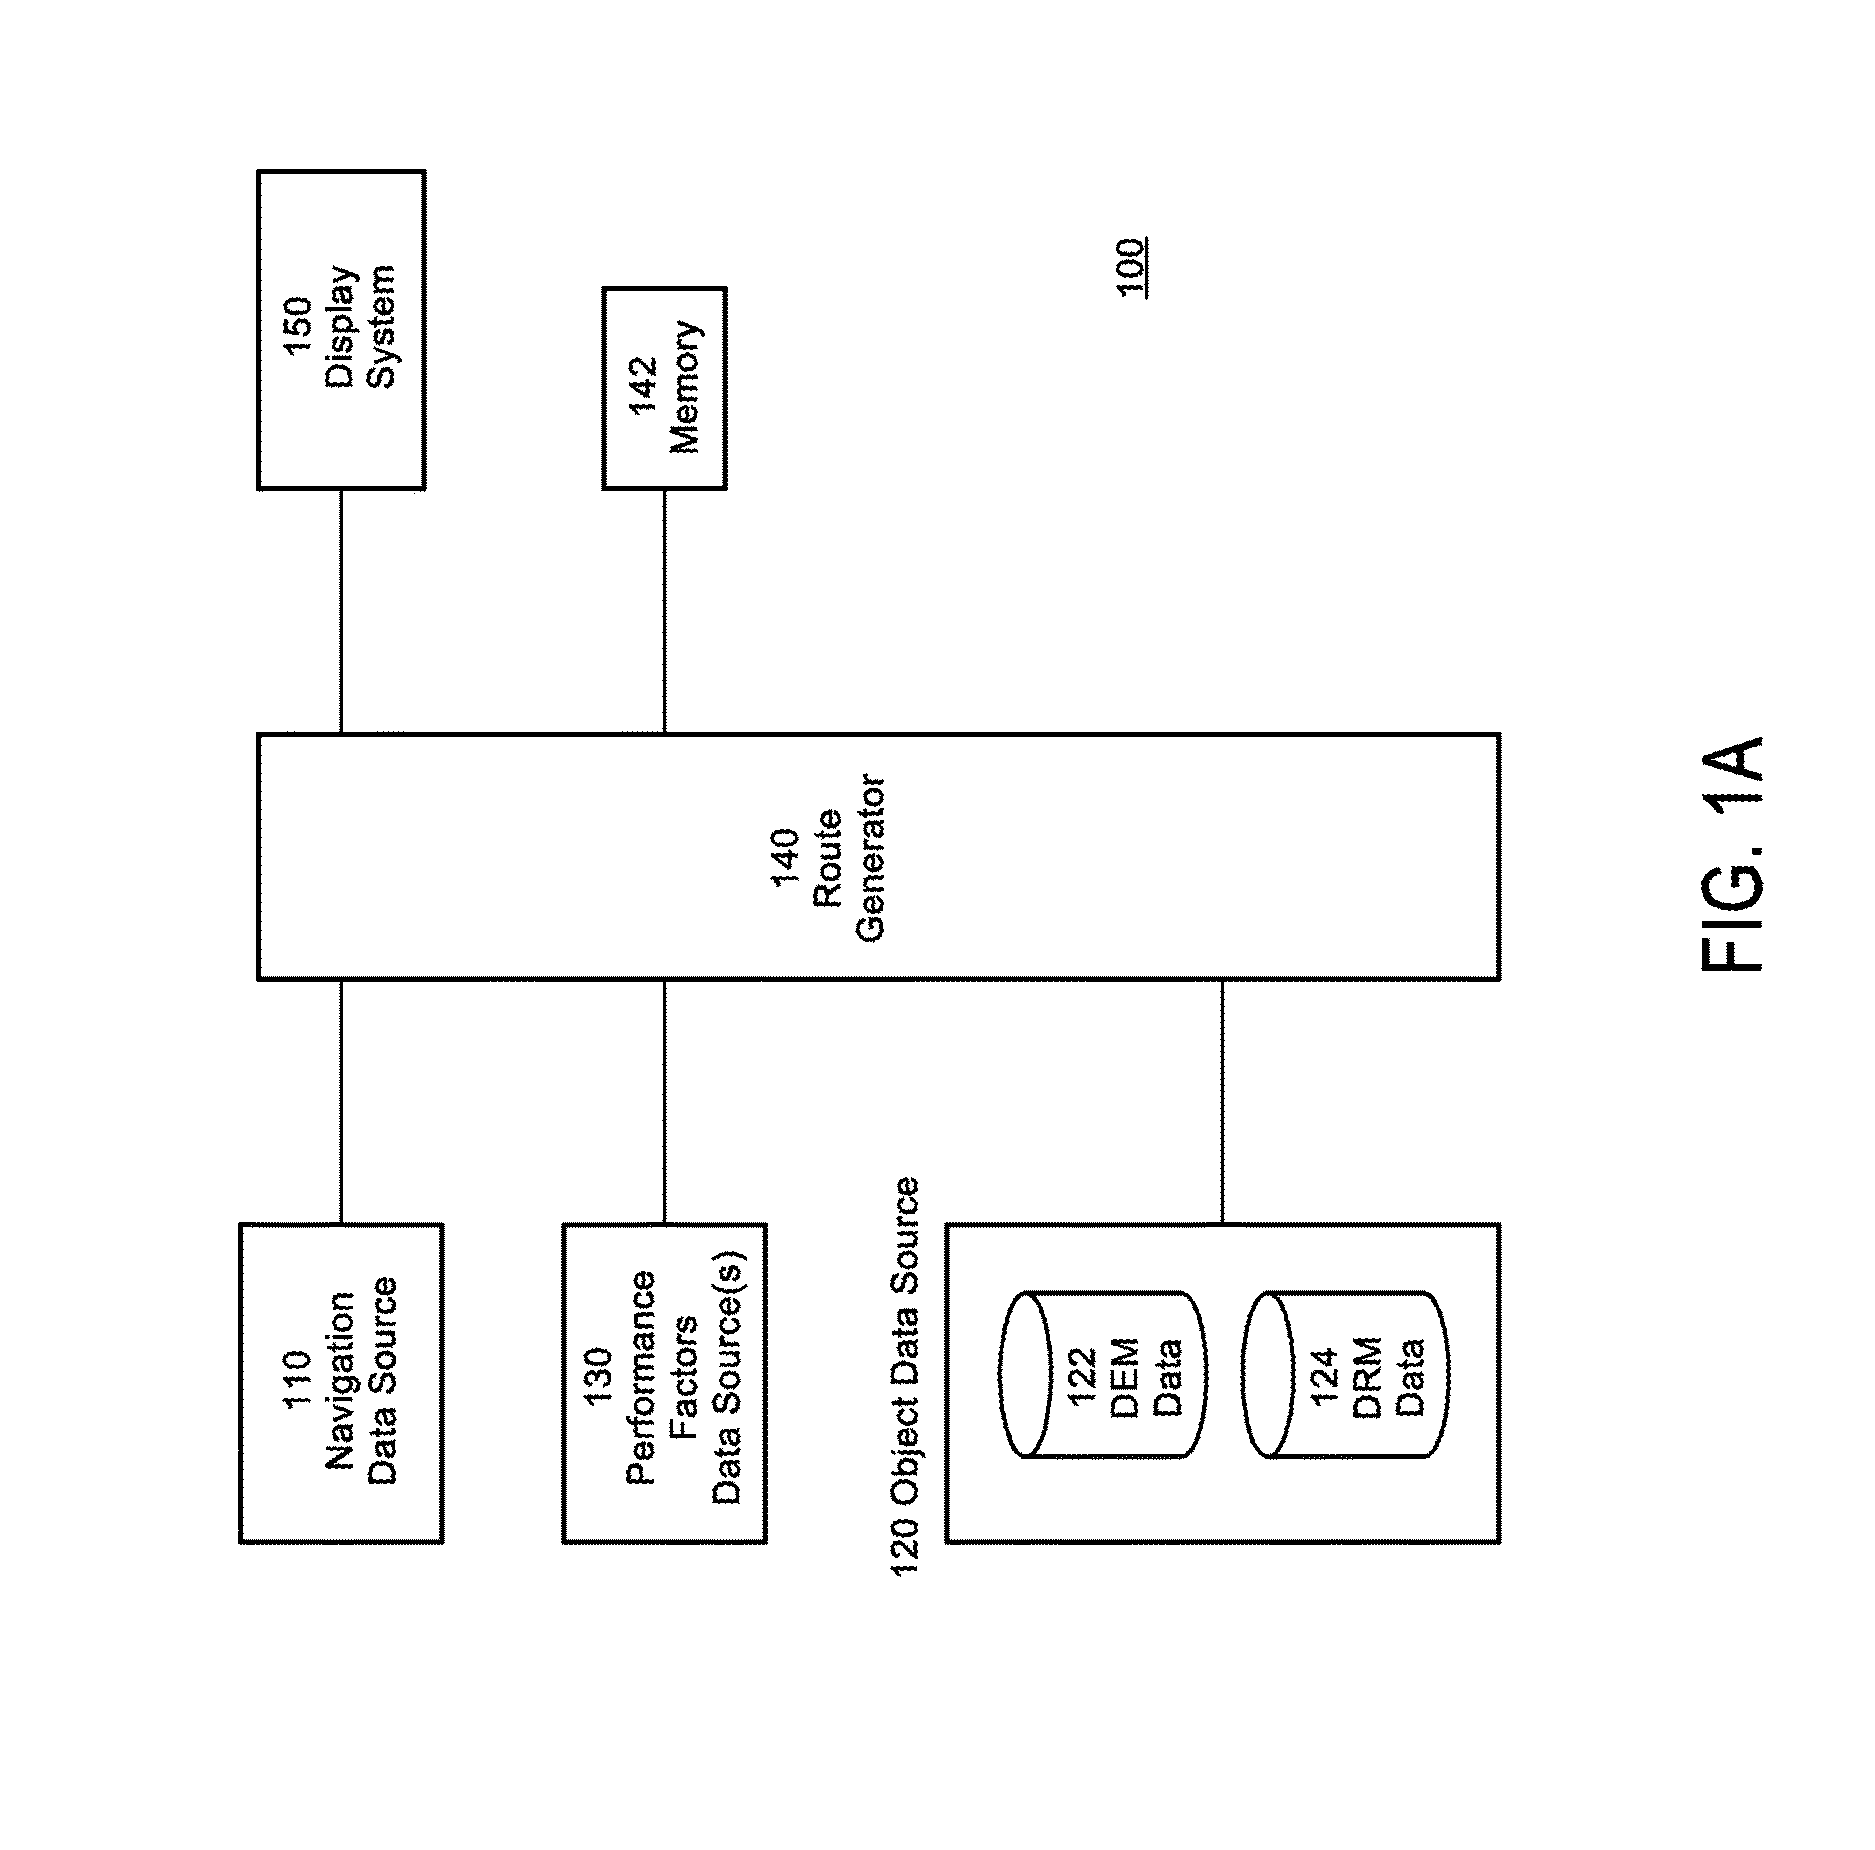 Risk-based flight path data generating system, device, and method